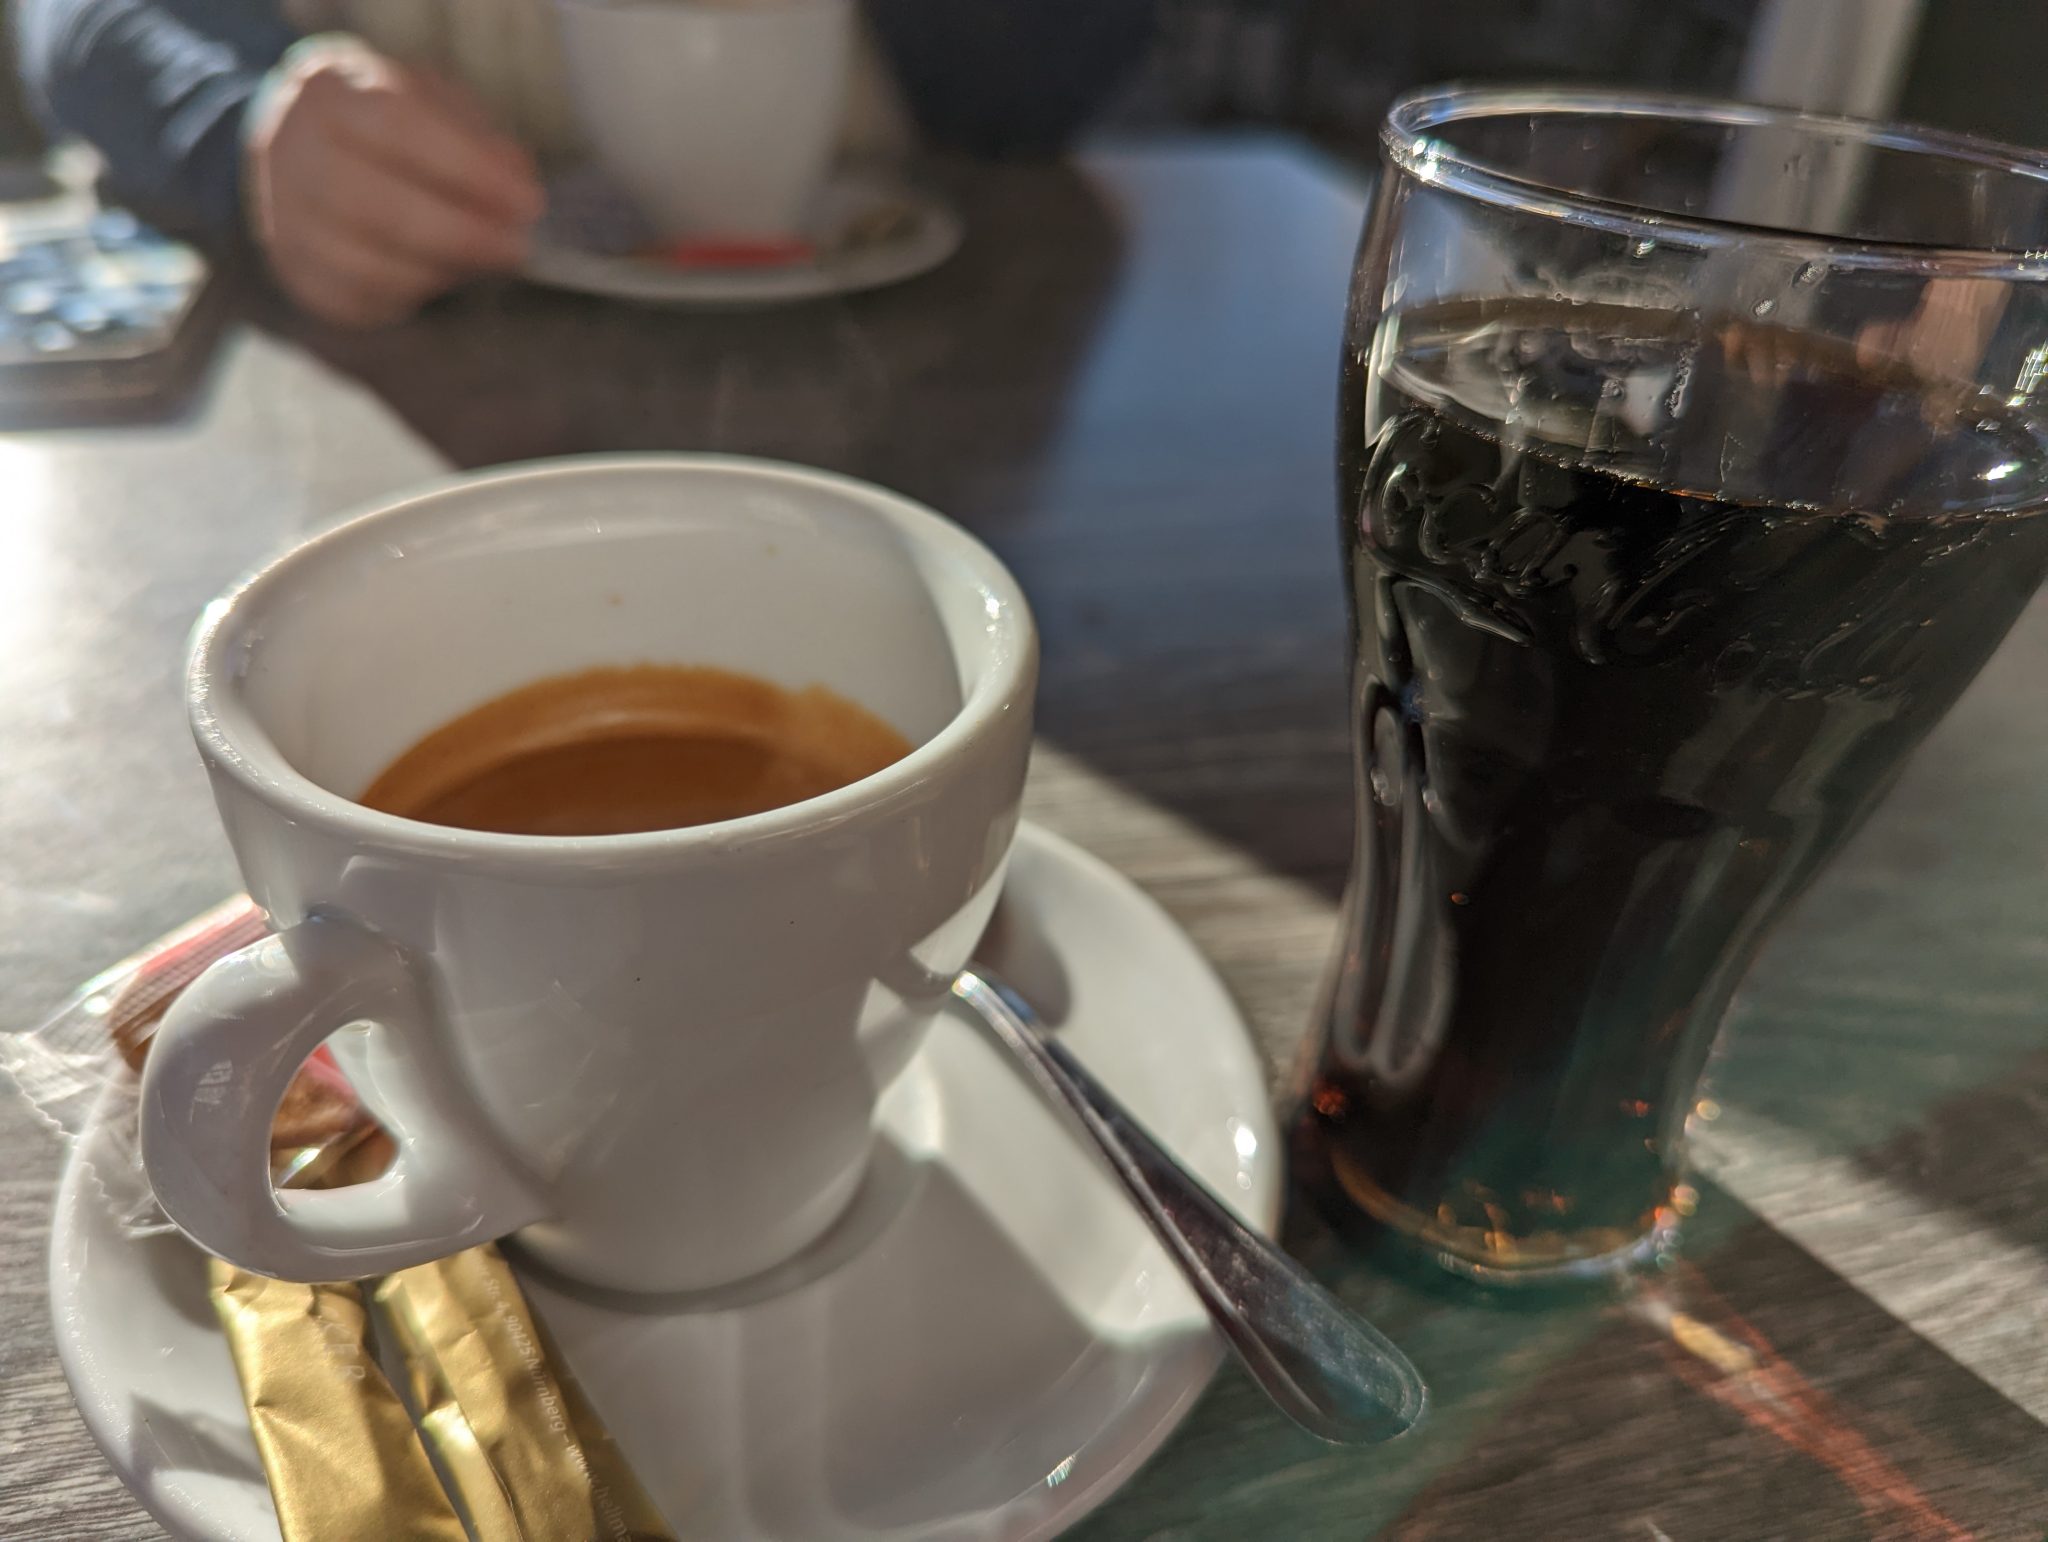 Relaxing with extra caffeine: double espresso and Coke Zero.